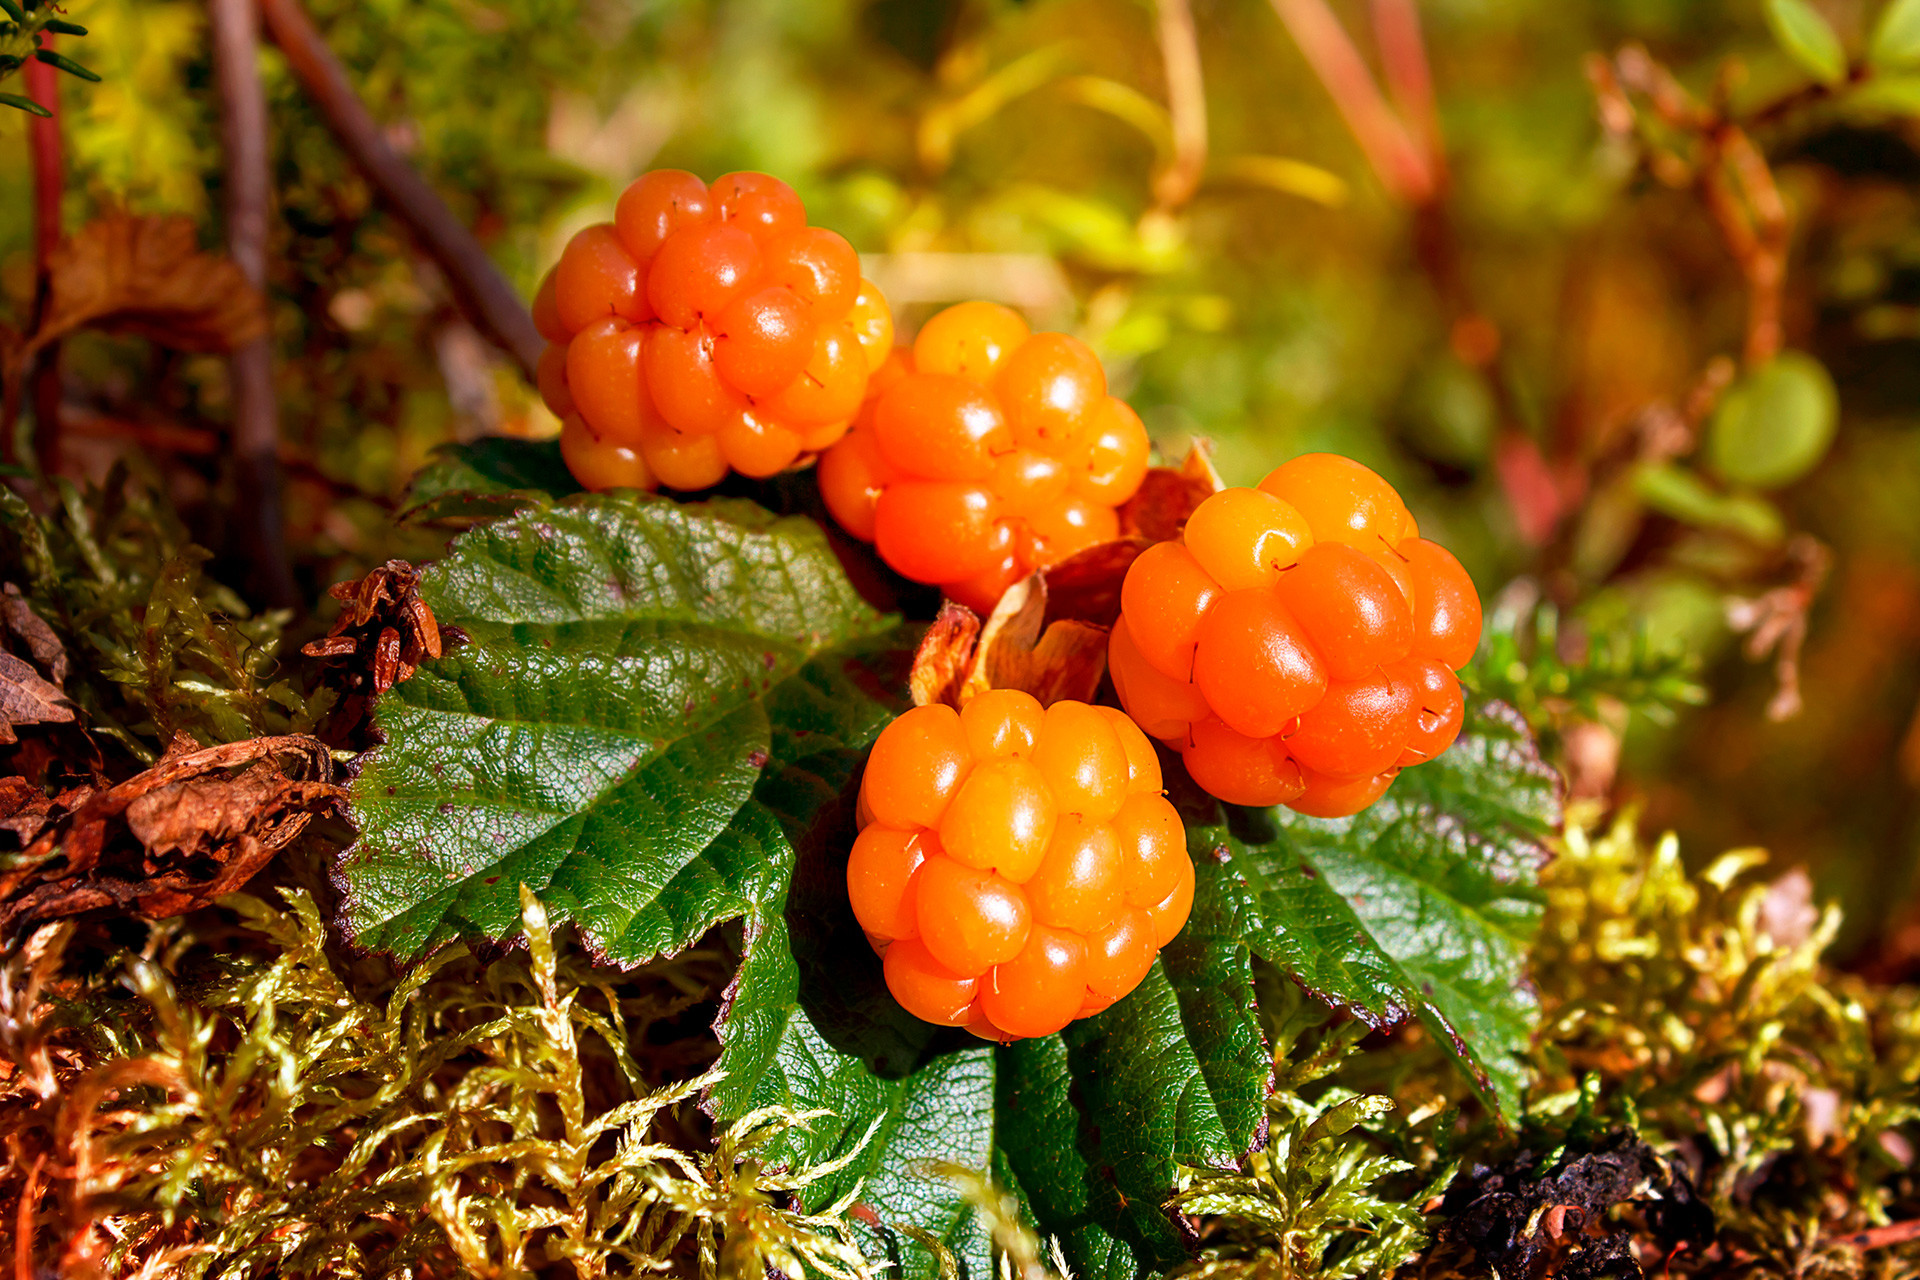 Cloudberry grows in the swamp areas of Russia’s North.